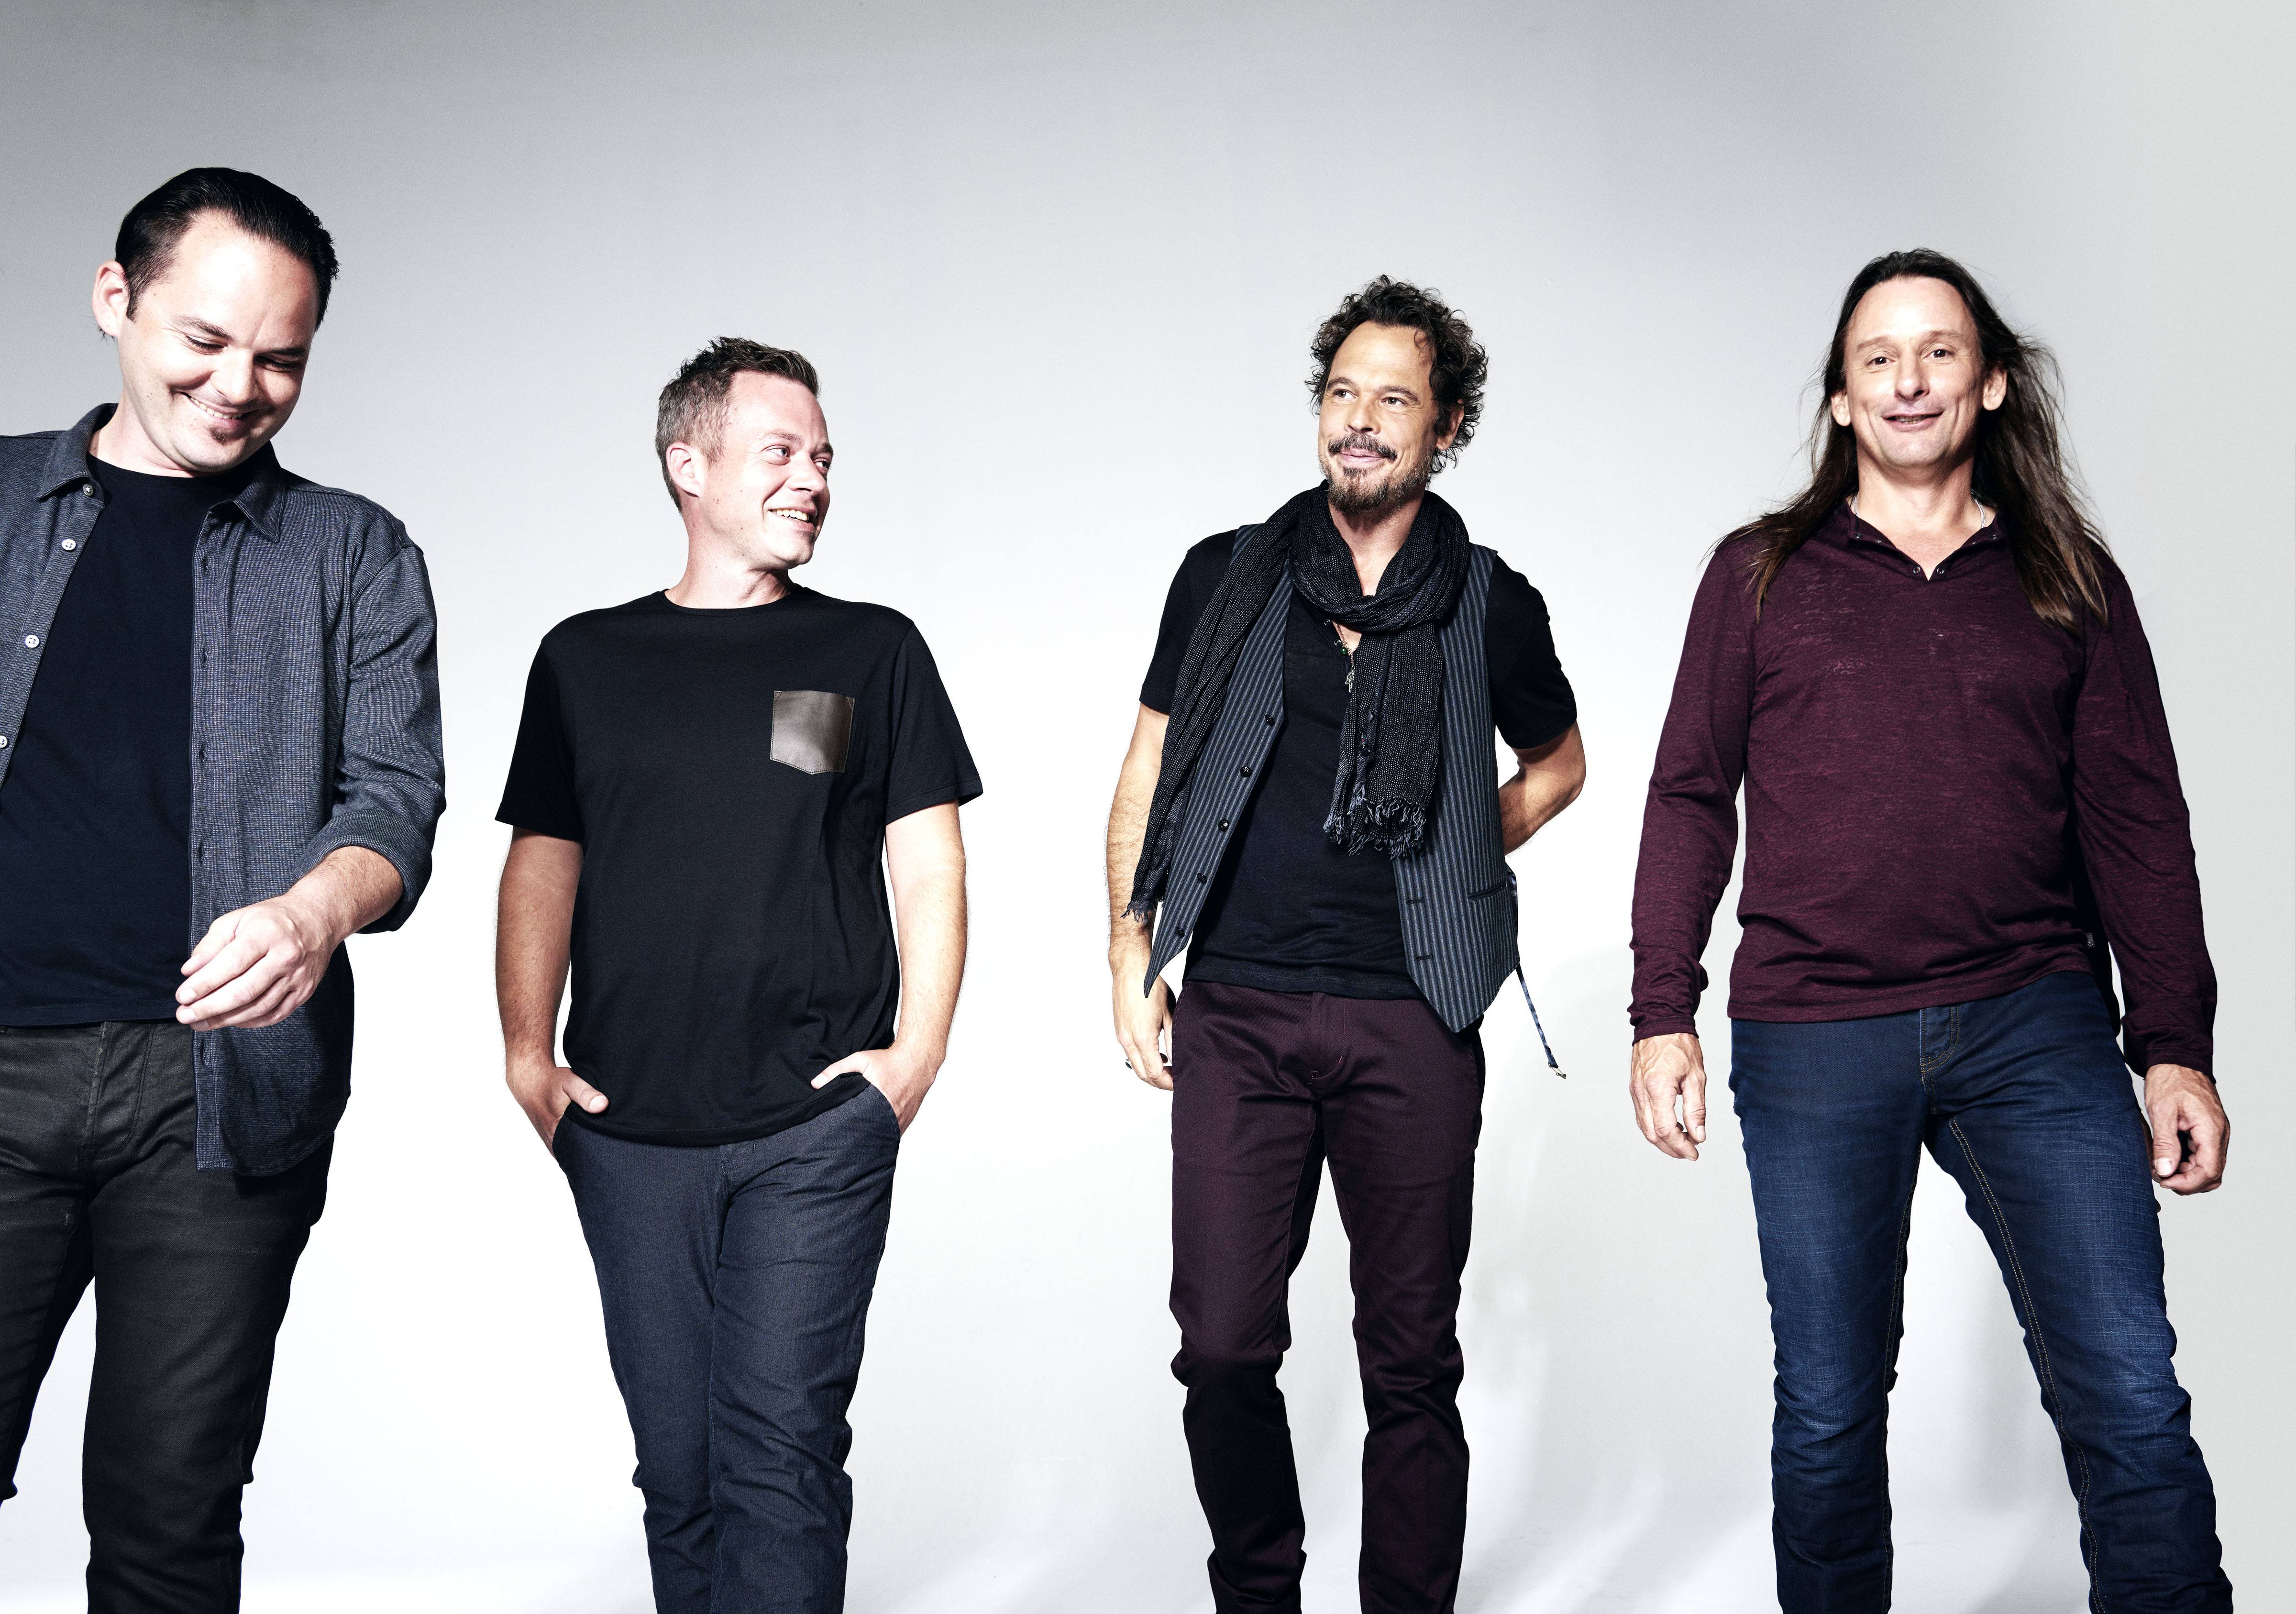 CLASSIC - Big Wreck are set to release their fifth full-length studio album Grace Street next month and will be making a City stop Feb. 3rd at the Memorial Centre.